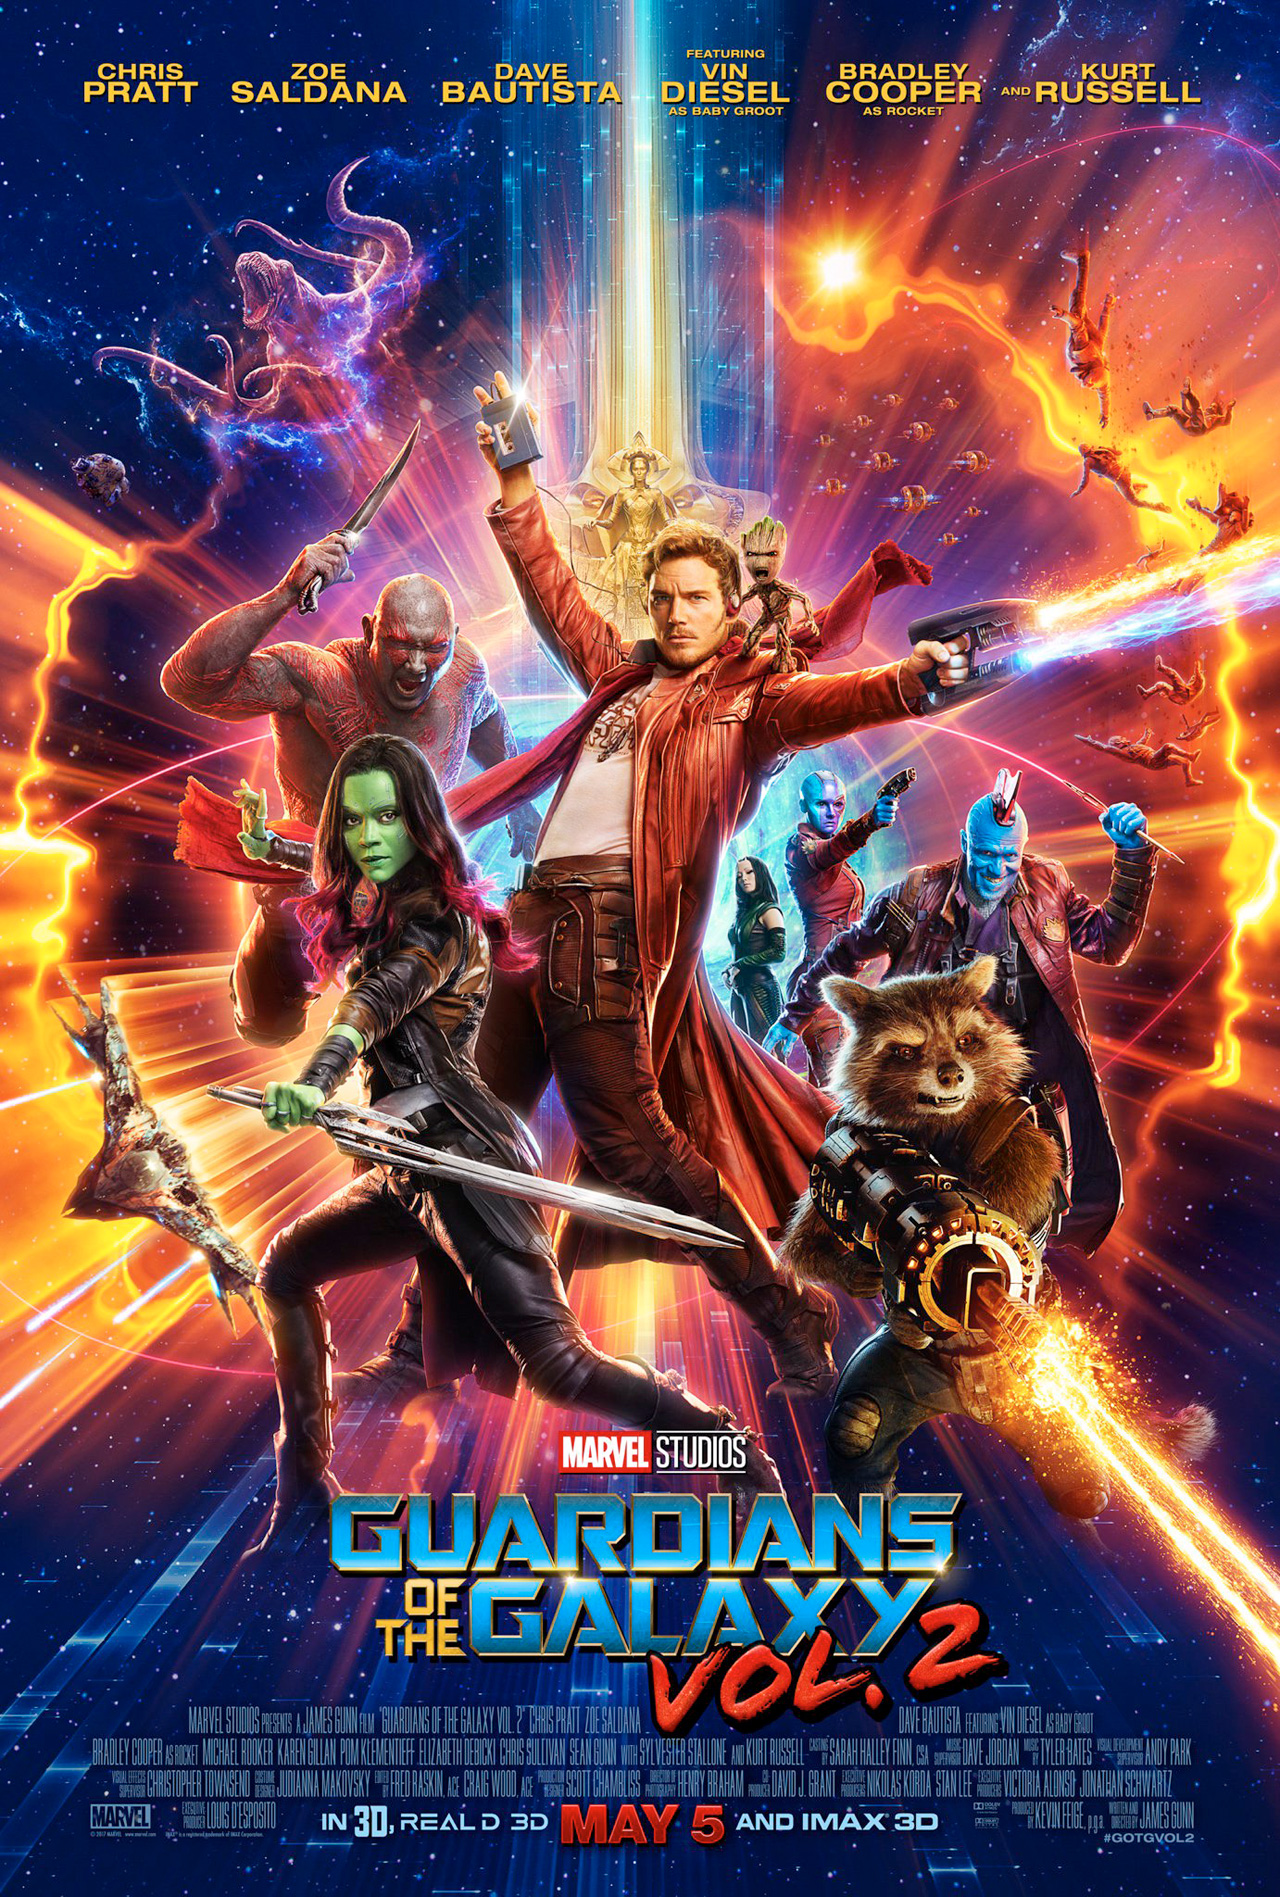 Guardians of the Galaxy Volume 2 Poster